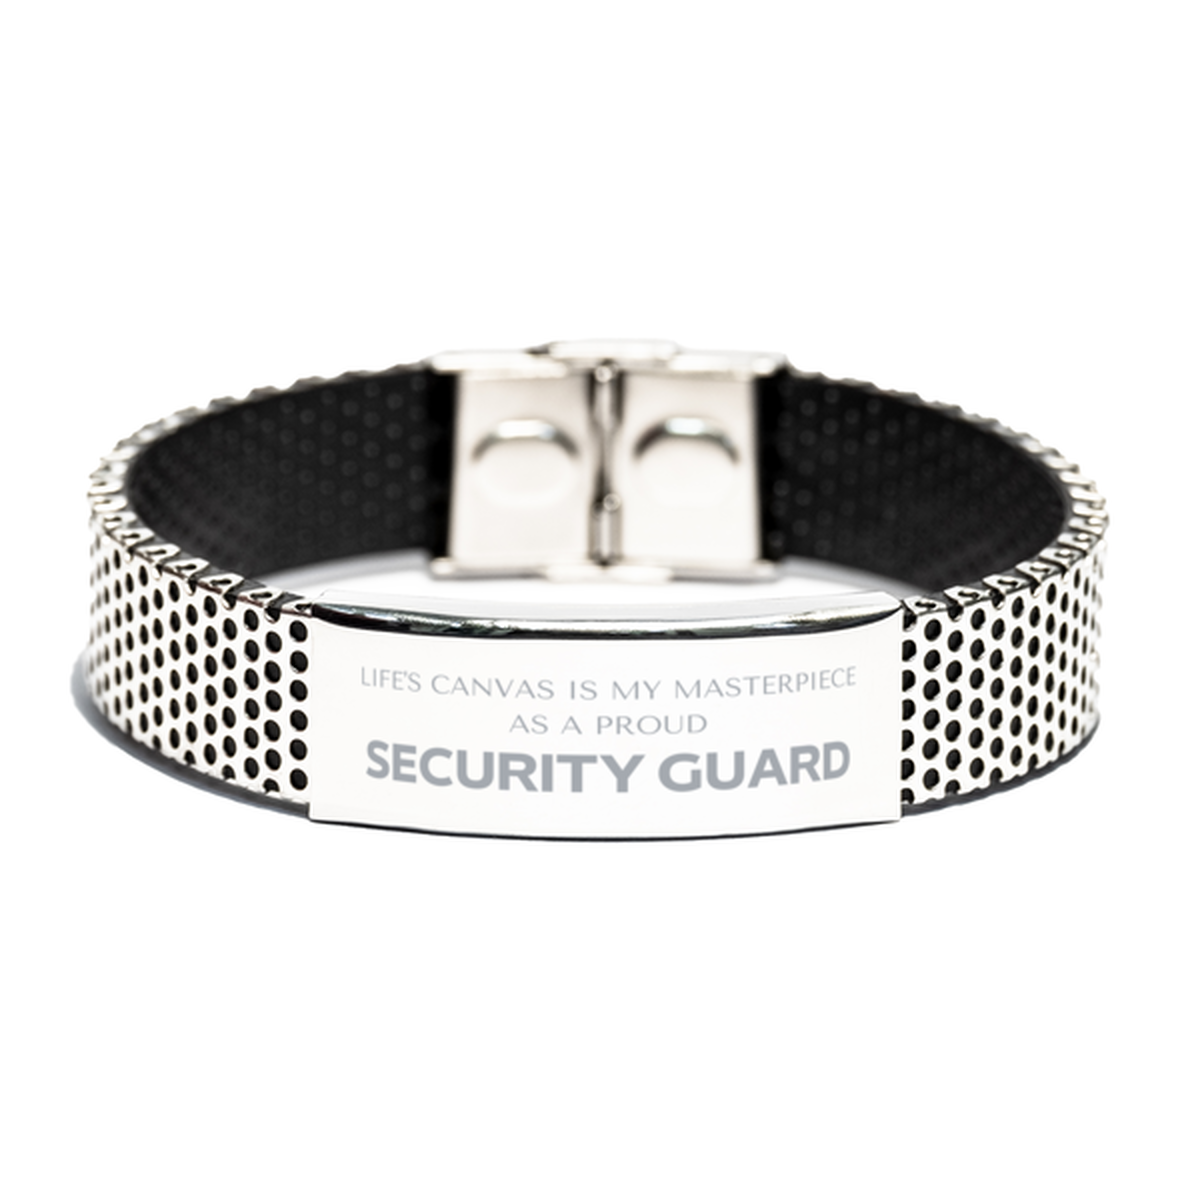 Proud Security Guard Gifts, Life's canvas is my masterpiece, Epic Birthday Christmas Unique Stainless Steel Bracelet For Security Guard, Coworkers, Men, Women, Friends